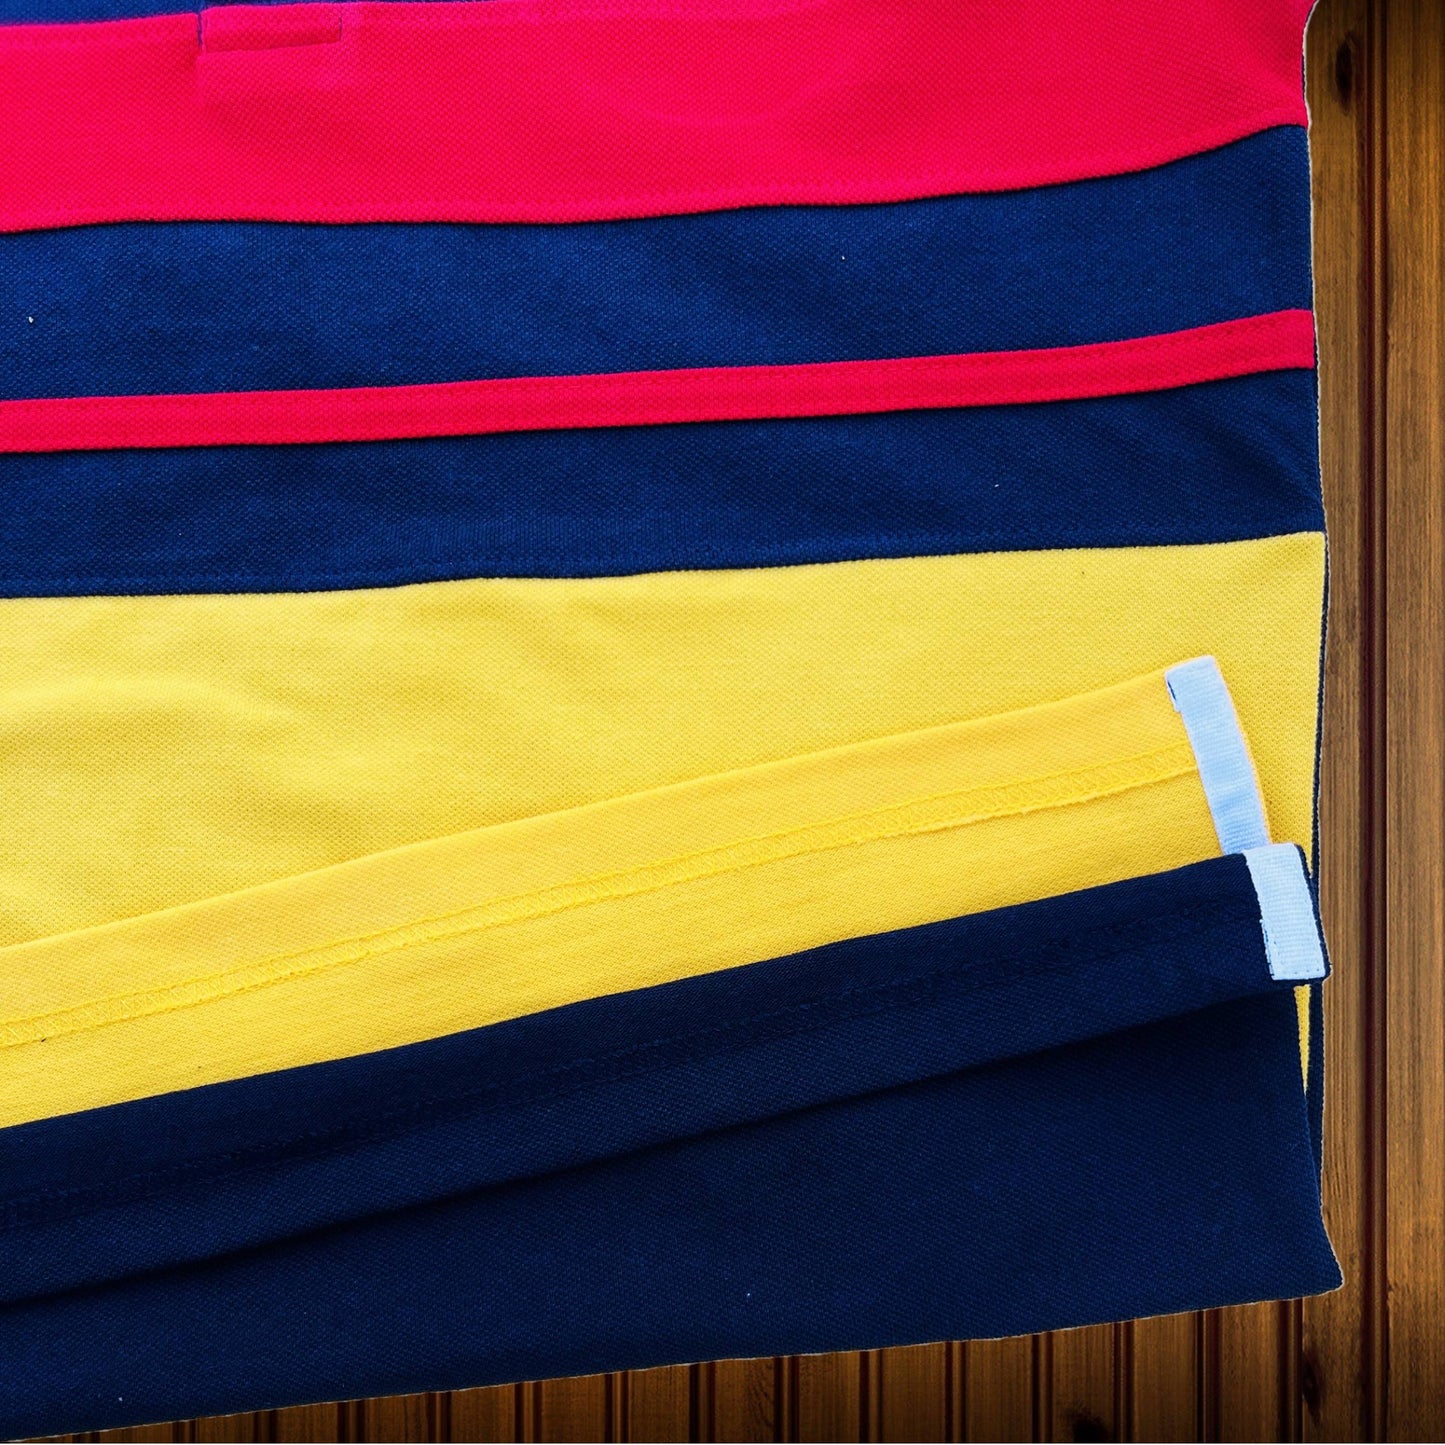 Men stylish T Shirt Navy Blue , Red with Golden Yellow, Red stripe